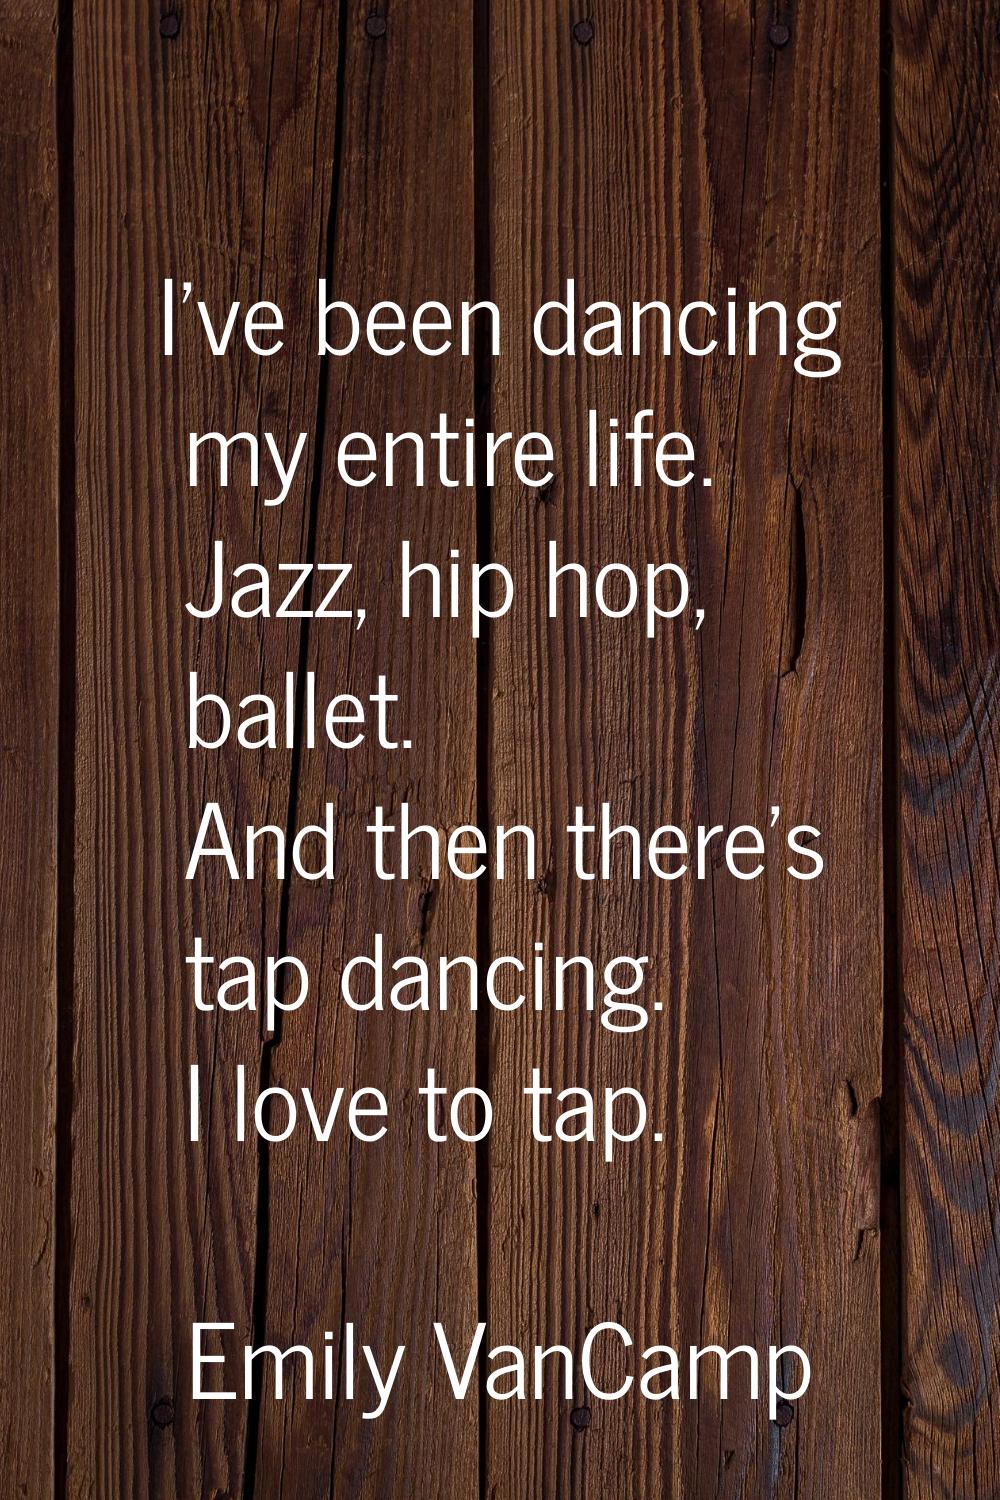 I've been dancing my entire life. Jazz, hip hop, ballet. And then there's tap dancing. I love to ta